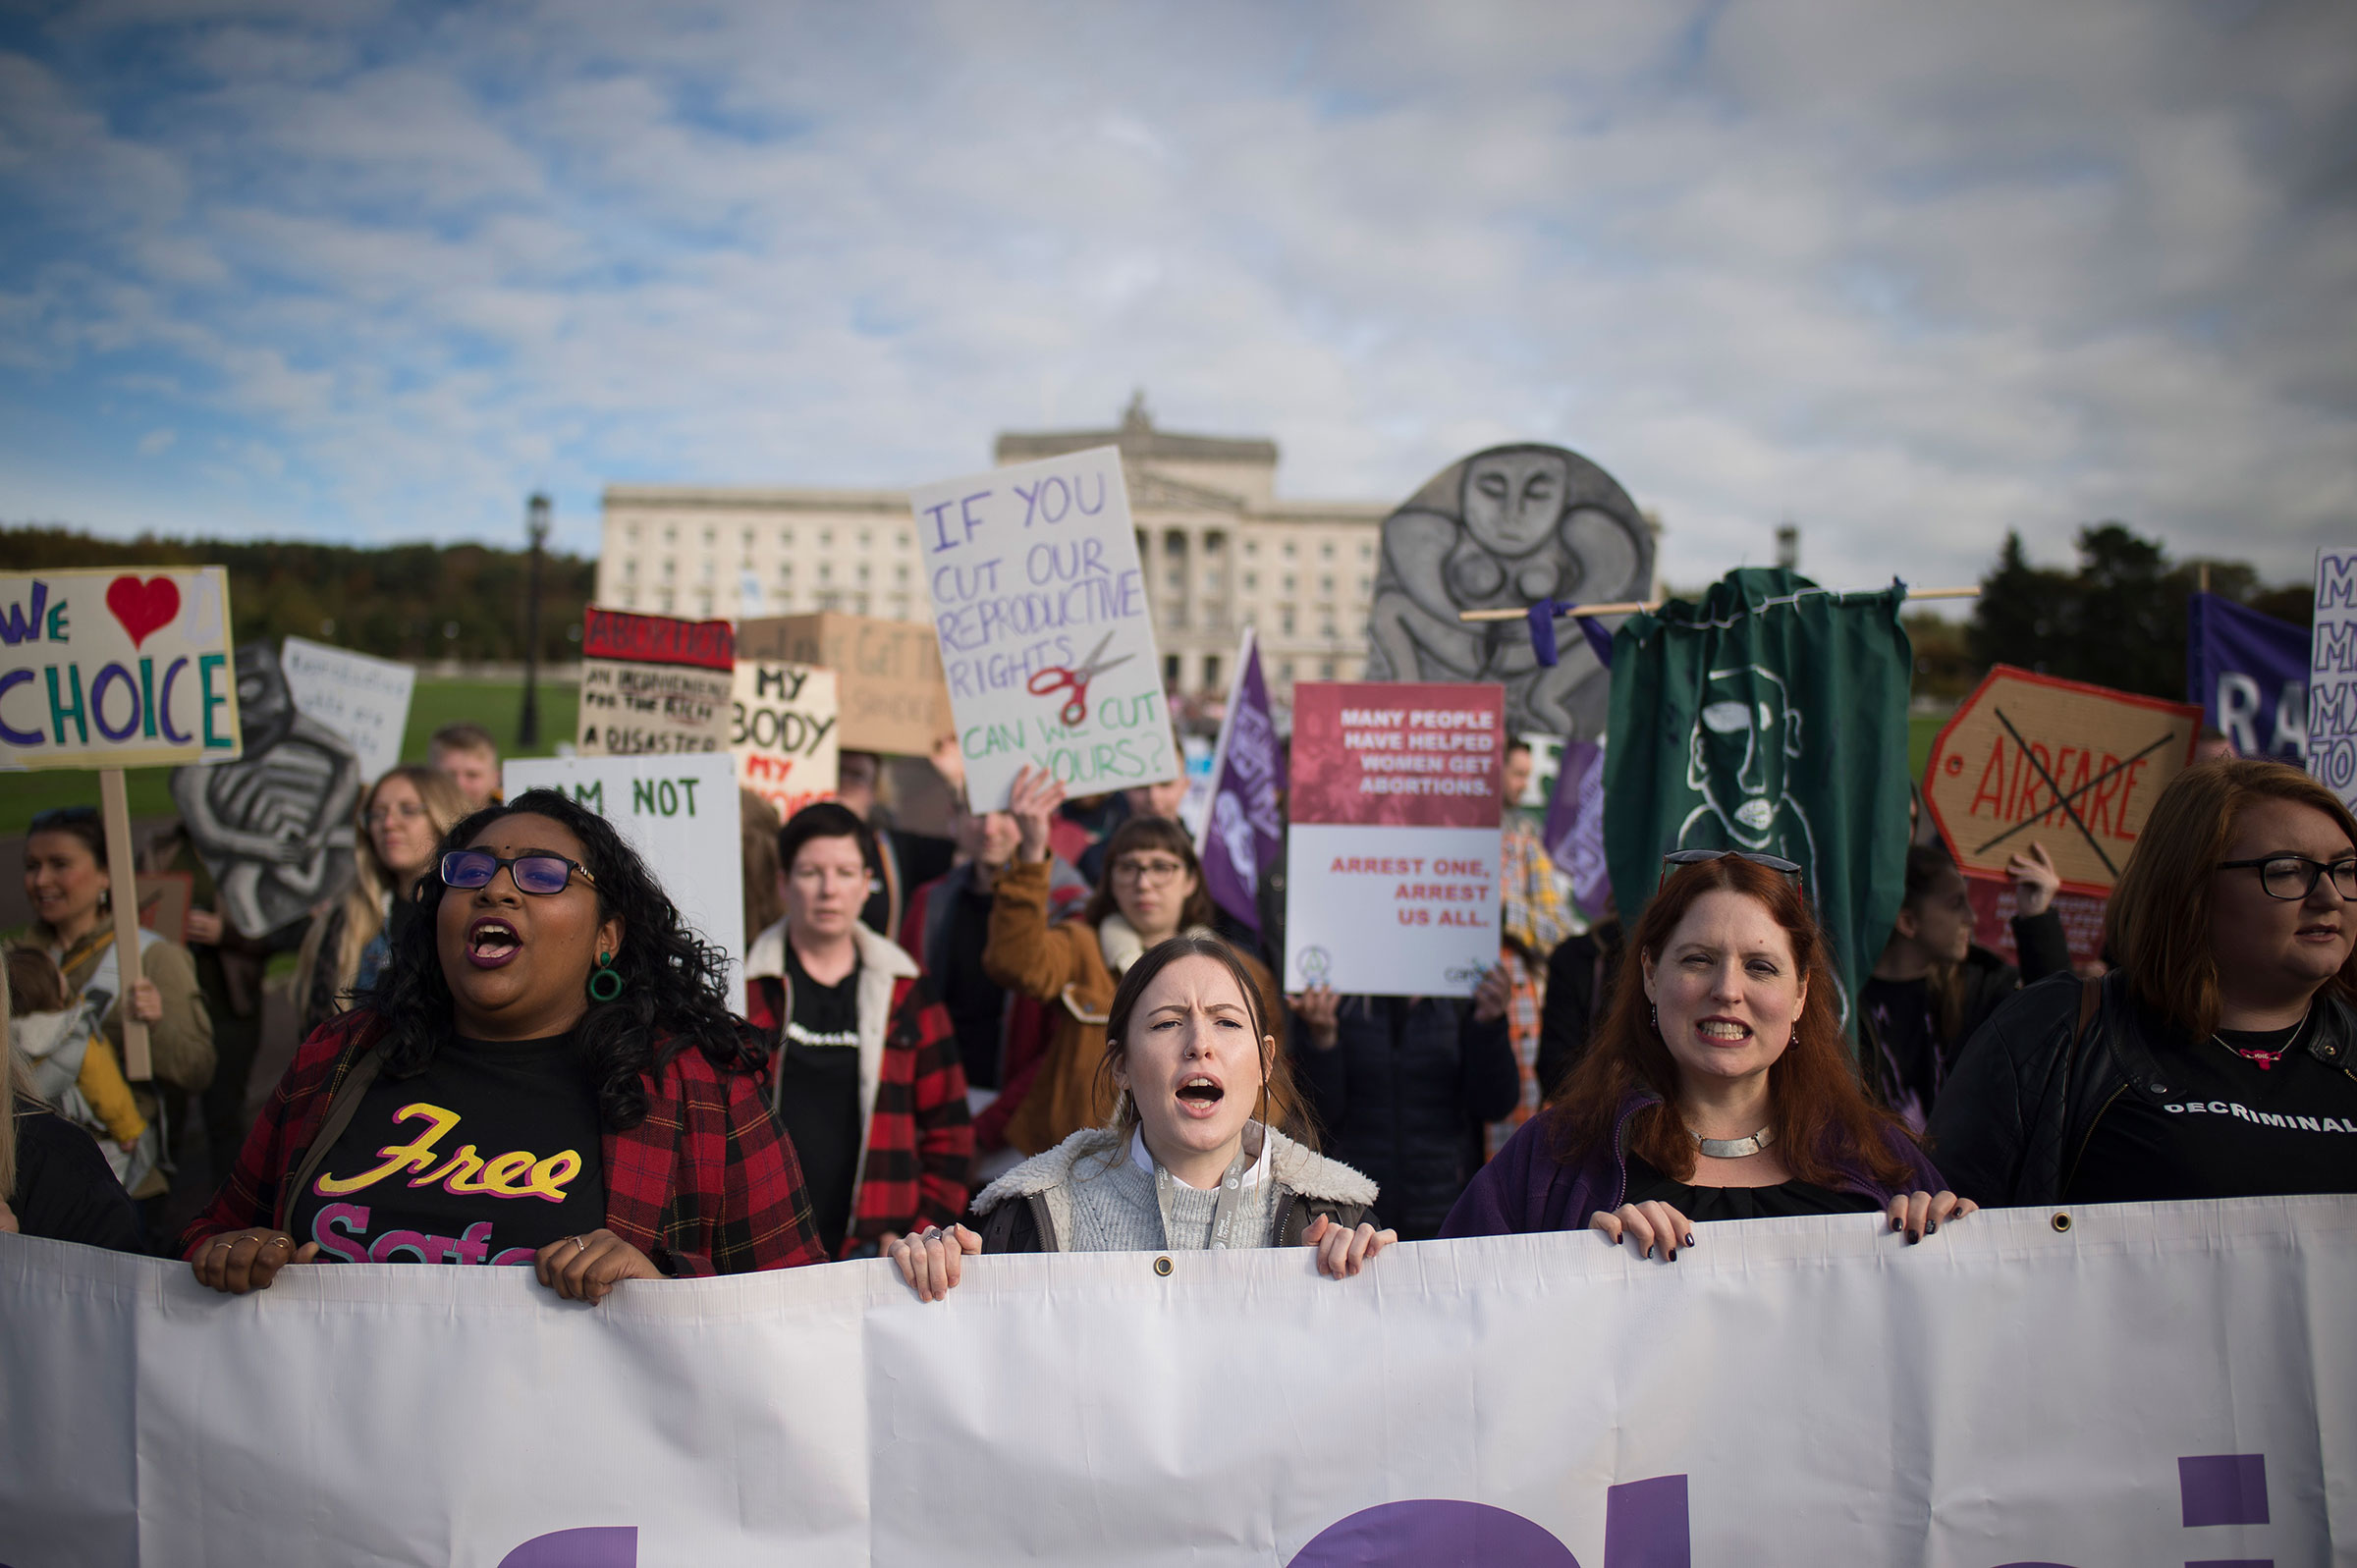 Members of abortion rights group Alliance for Choice make their way to Stormont in Belfast, Northern Ireland on Oct. 21, 2019. (Charles McQuillan—Getty Images)